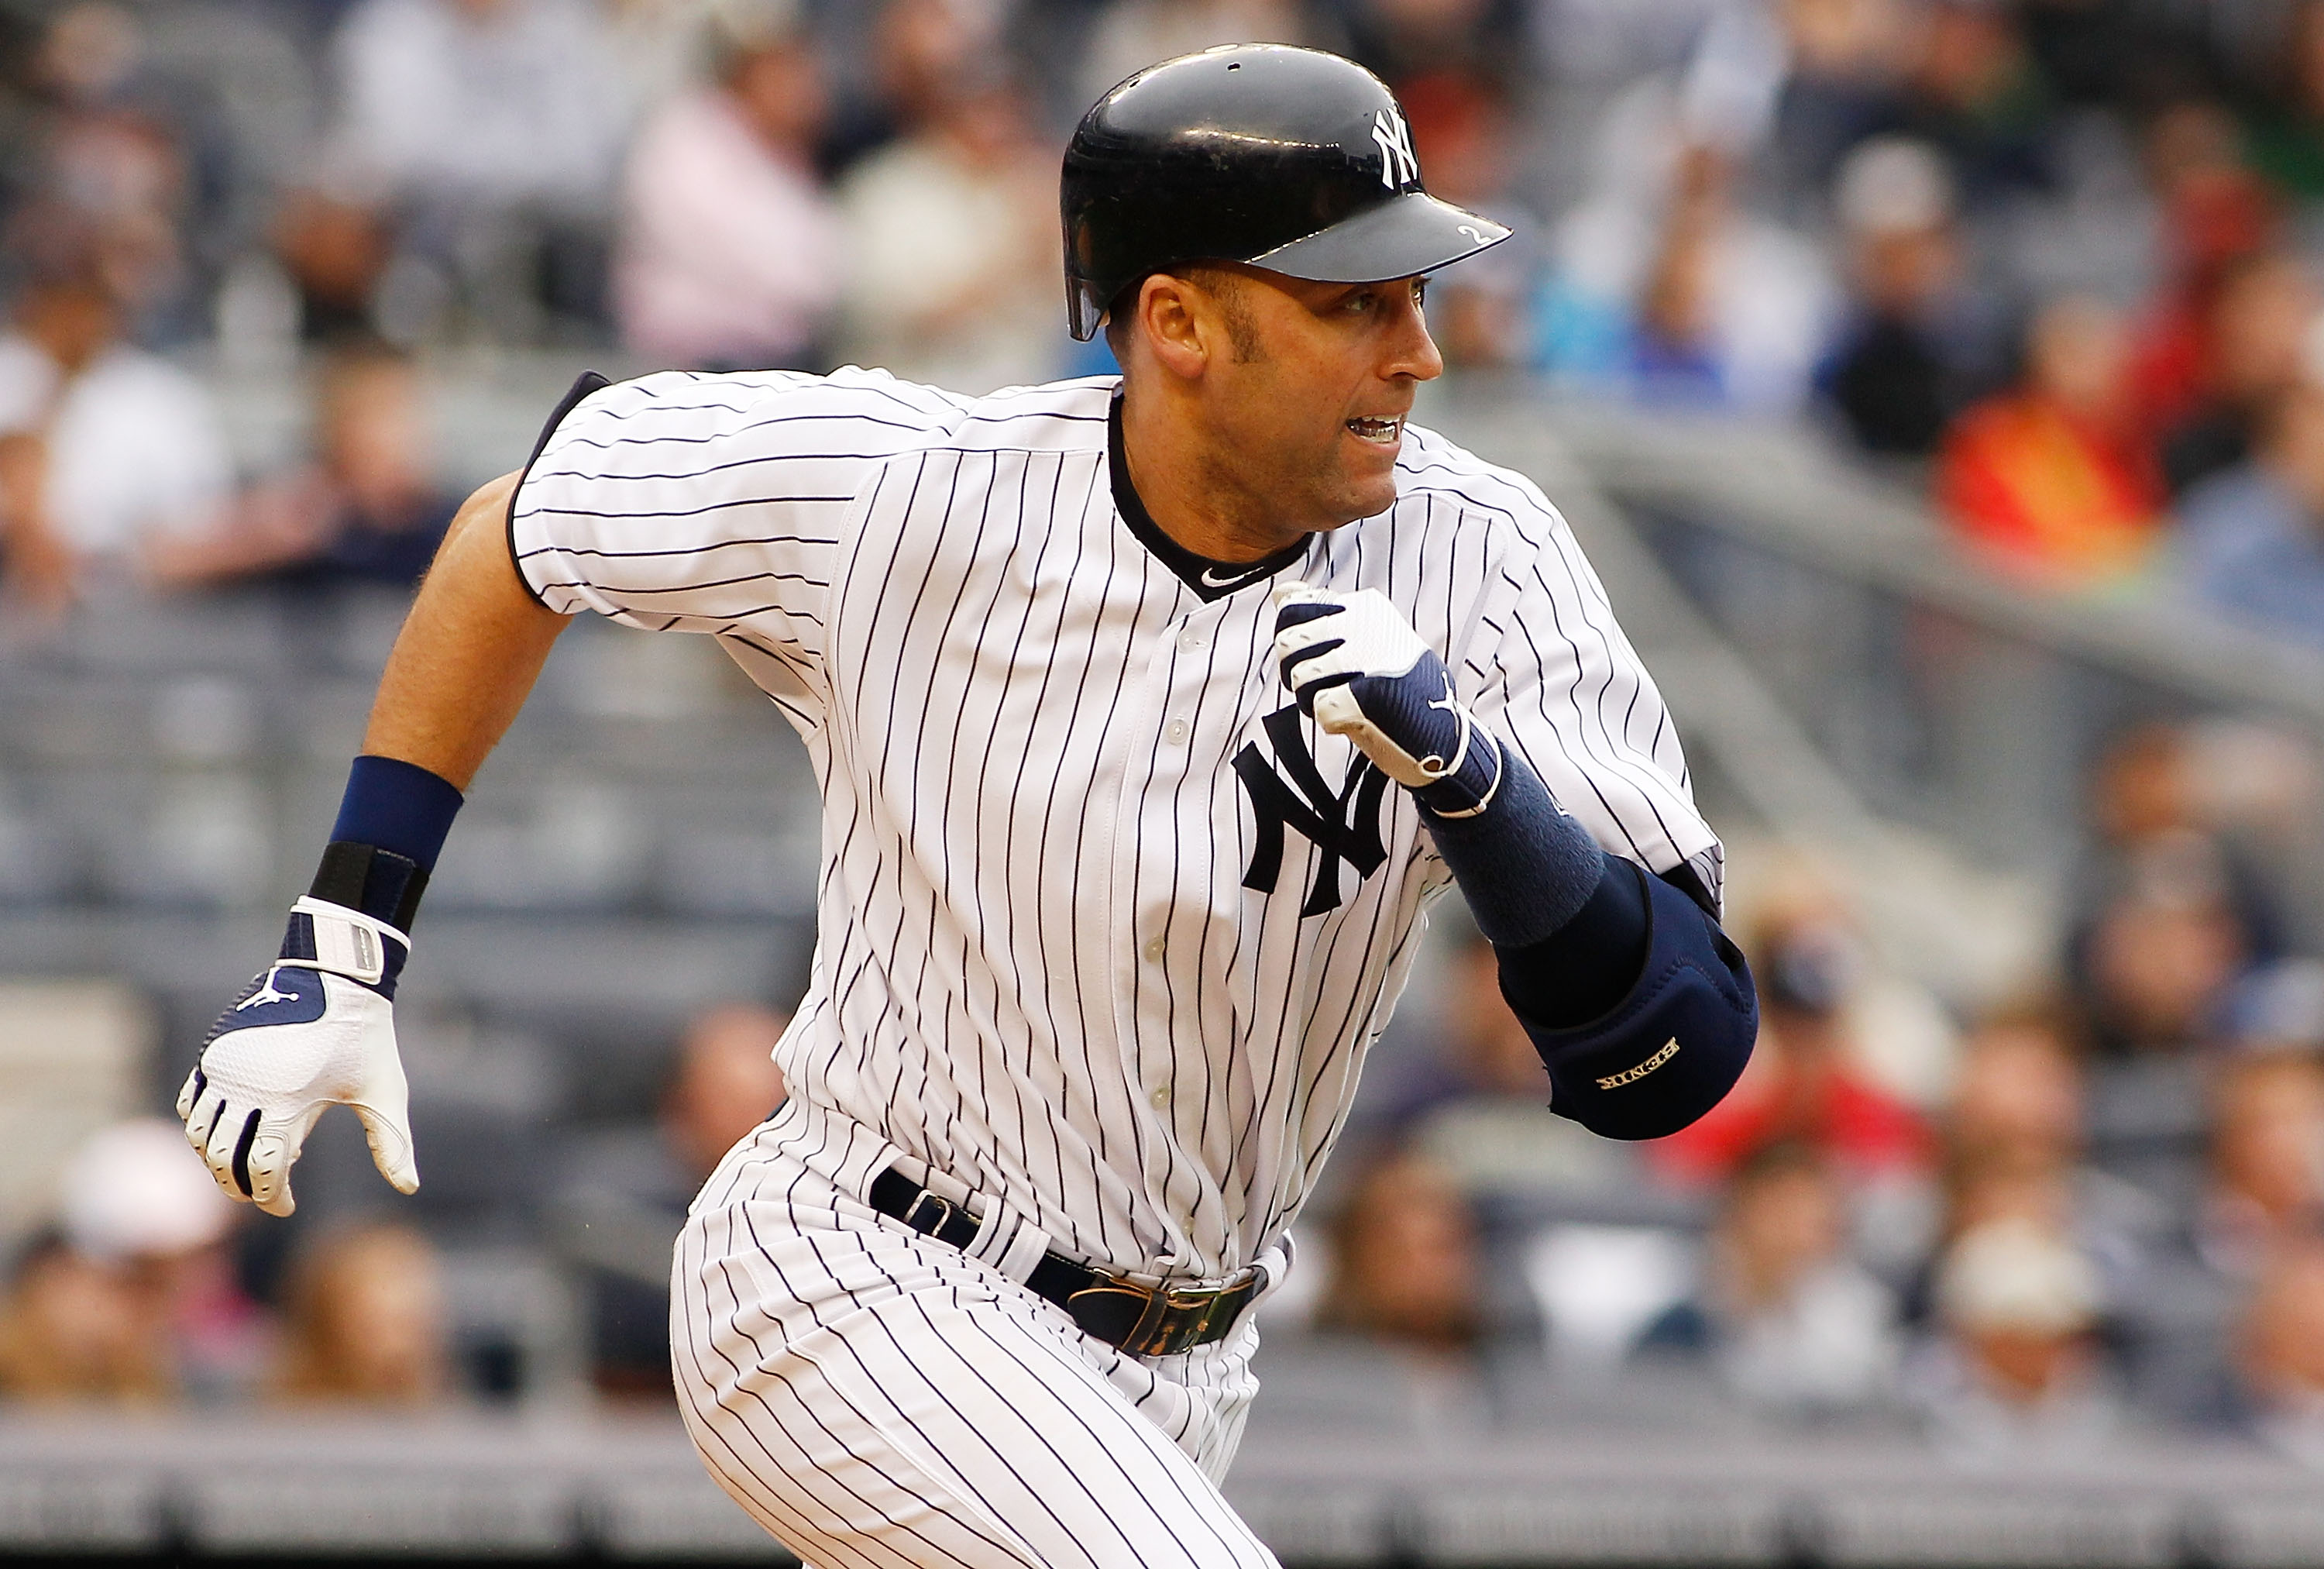 Derek Jeter and Every MLB Team's Most Disappointing Offensive